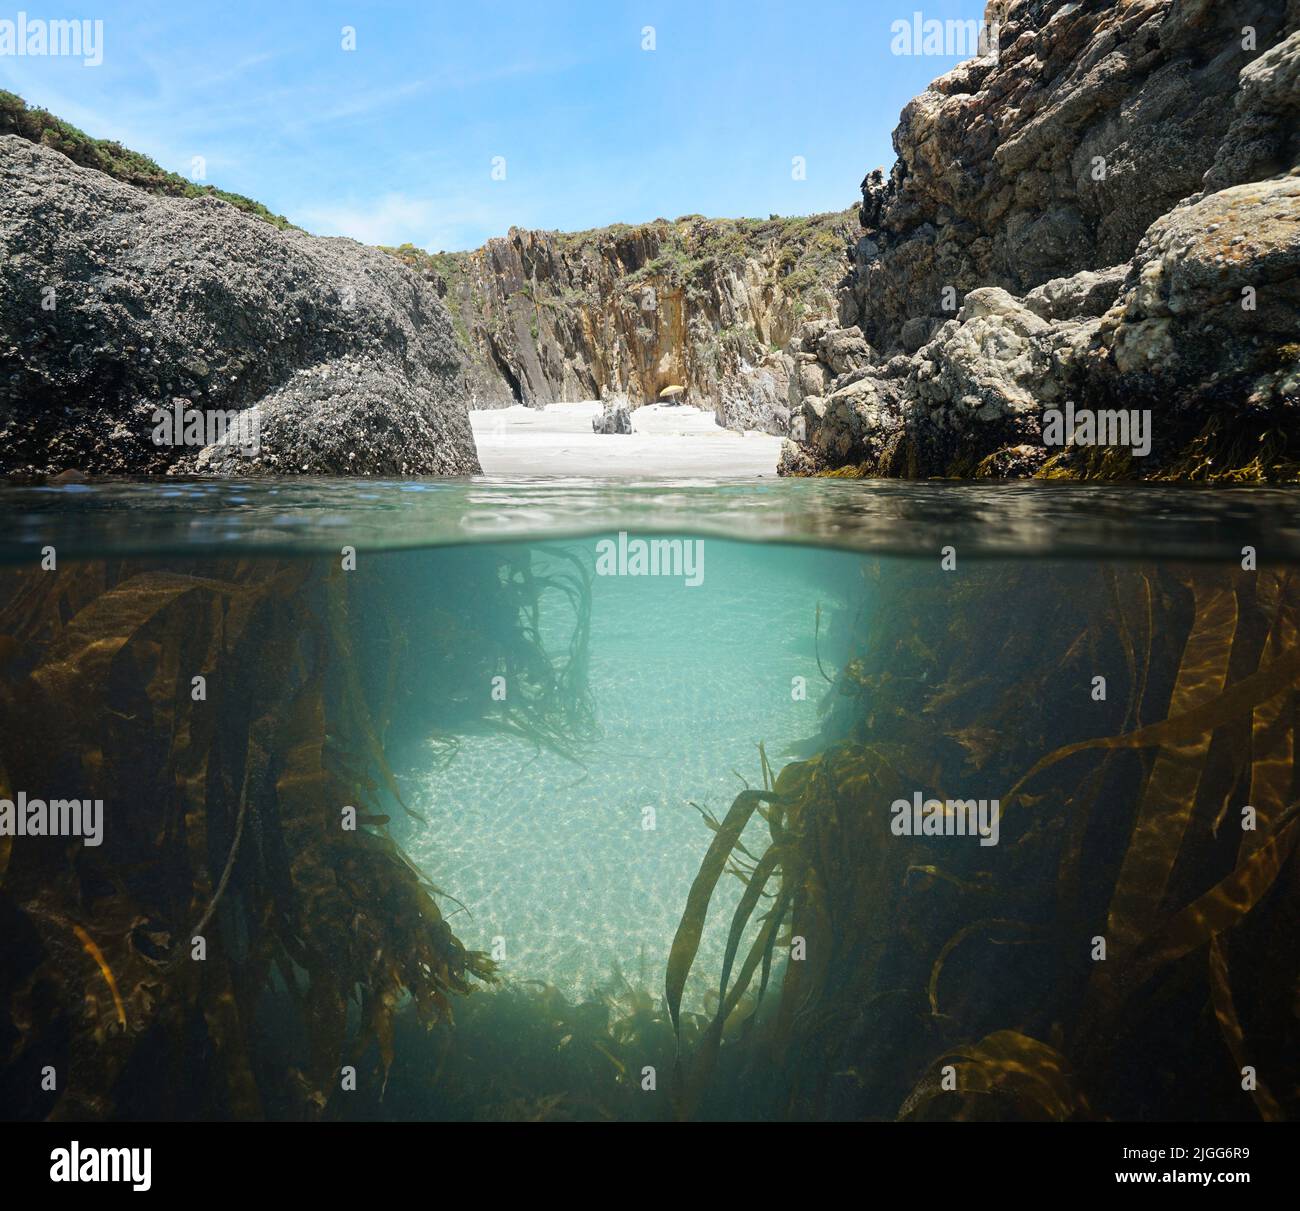 Narrow passage between rocks to a secluded beach with kelp underwater, split level view over and under water surface, Atlantic ocean, Spain, Galicia Stock Photo